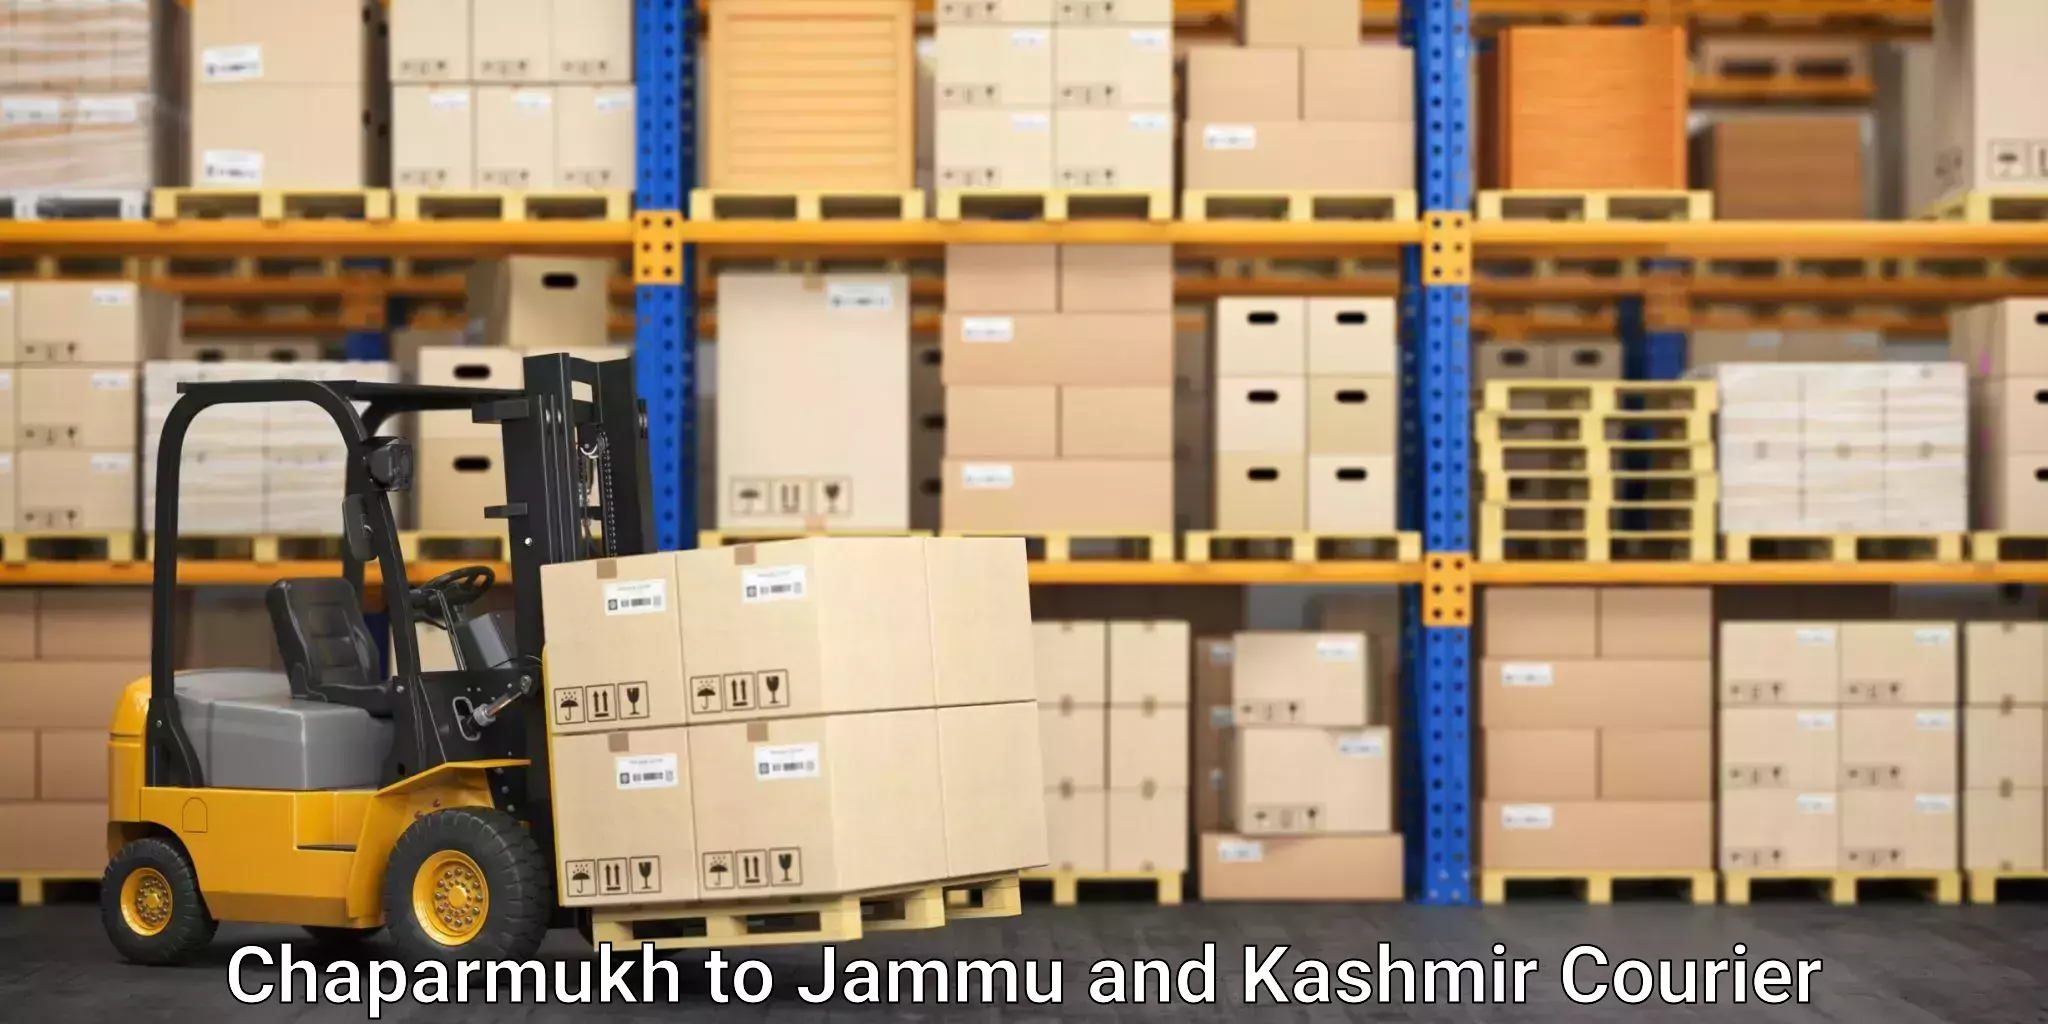 High-speed delivery Chaparmukh to Jammu and Kashmir